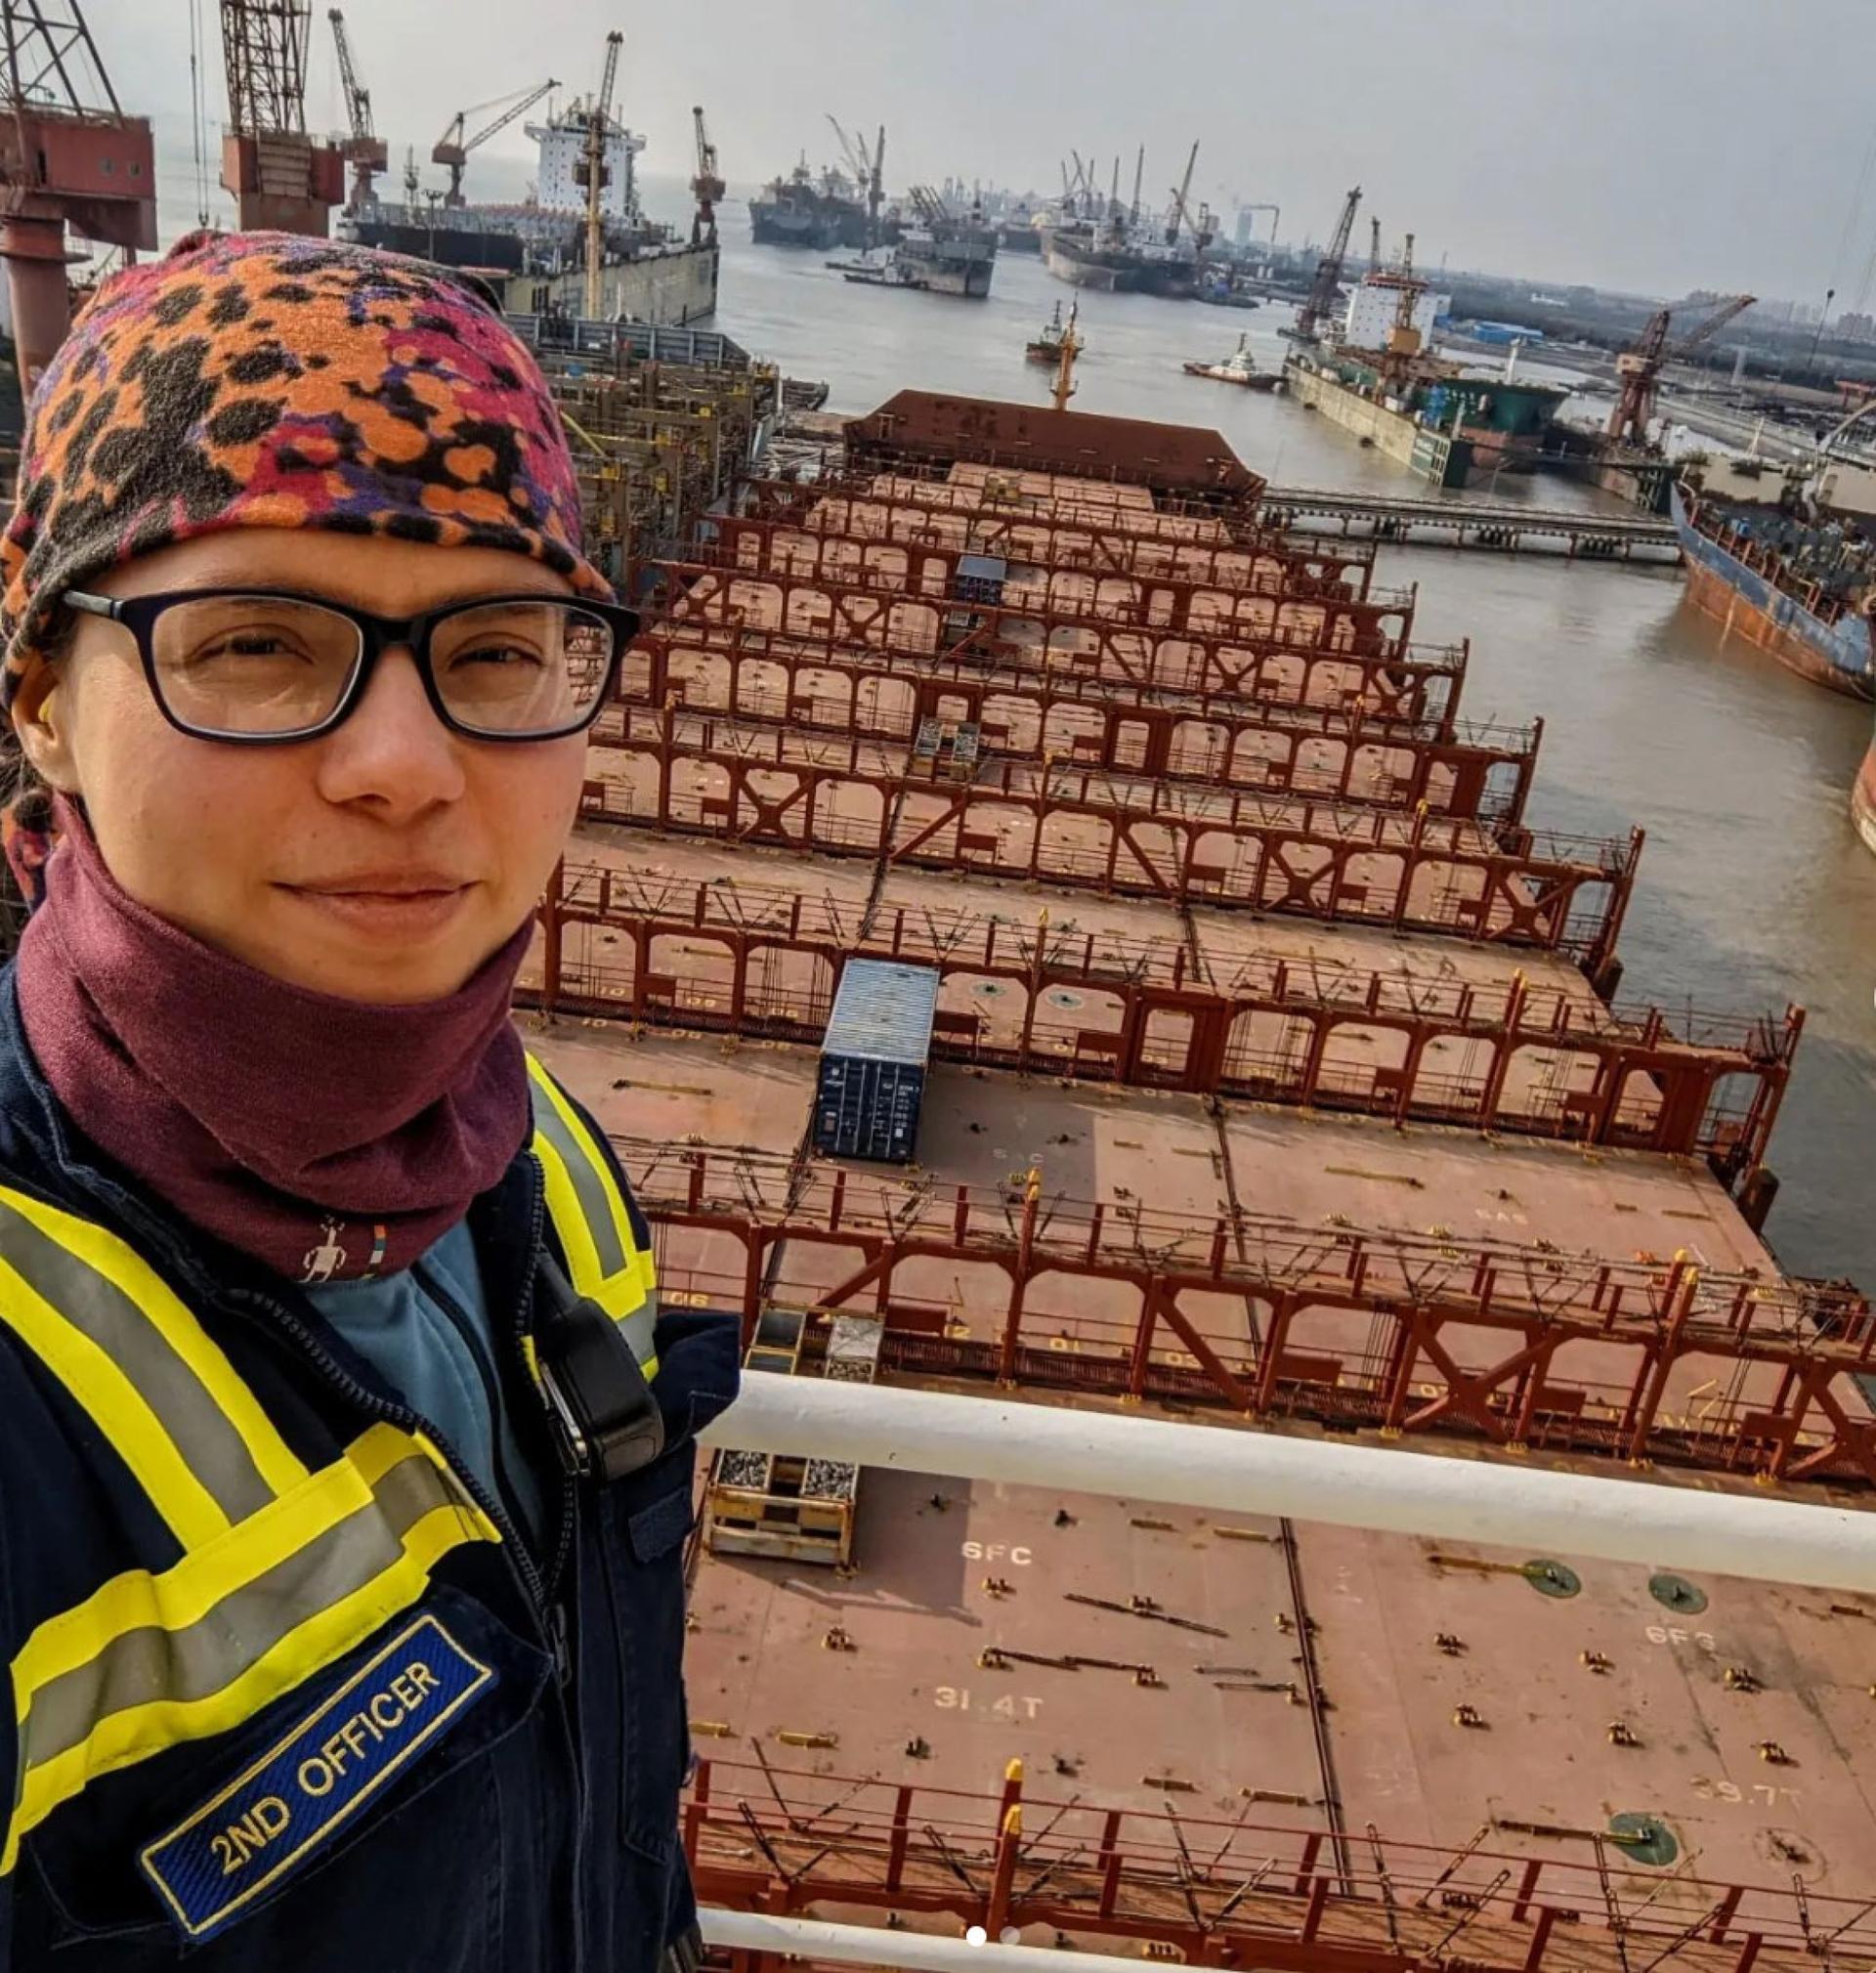 Madeleine Wolczko, second mate on a cargo ship, has been stranded in the Shanghai port during the COVID-19 lockdown. 